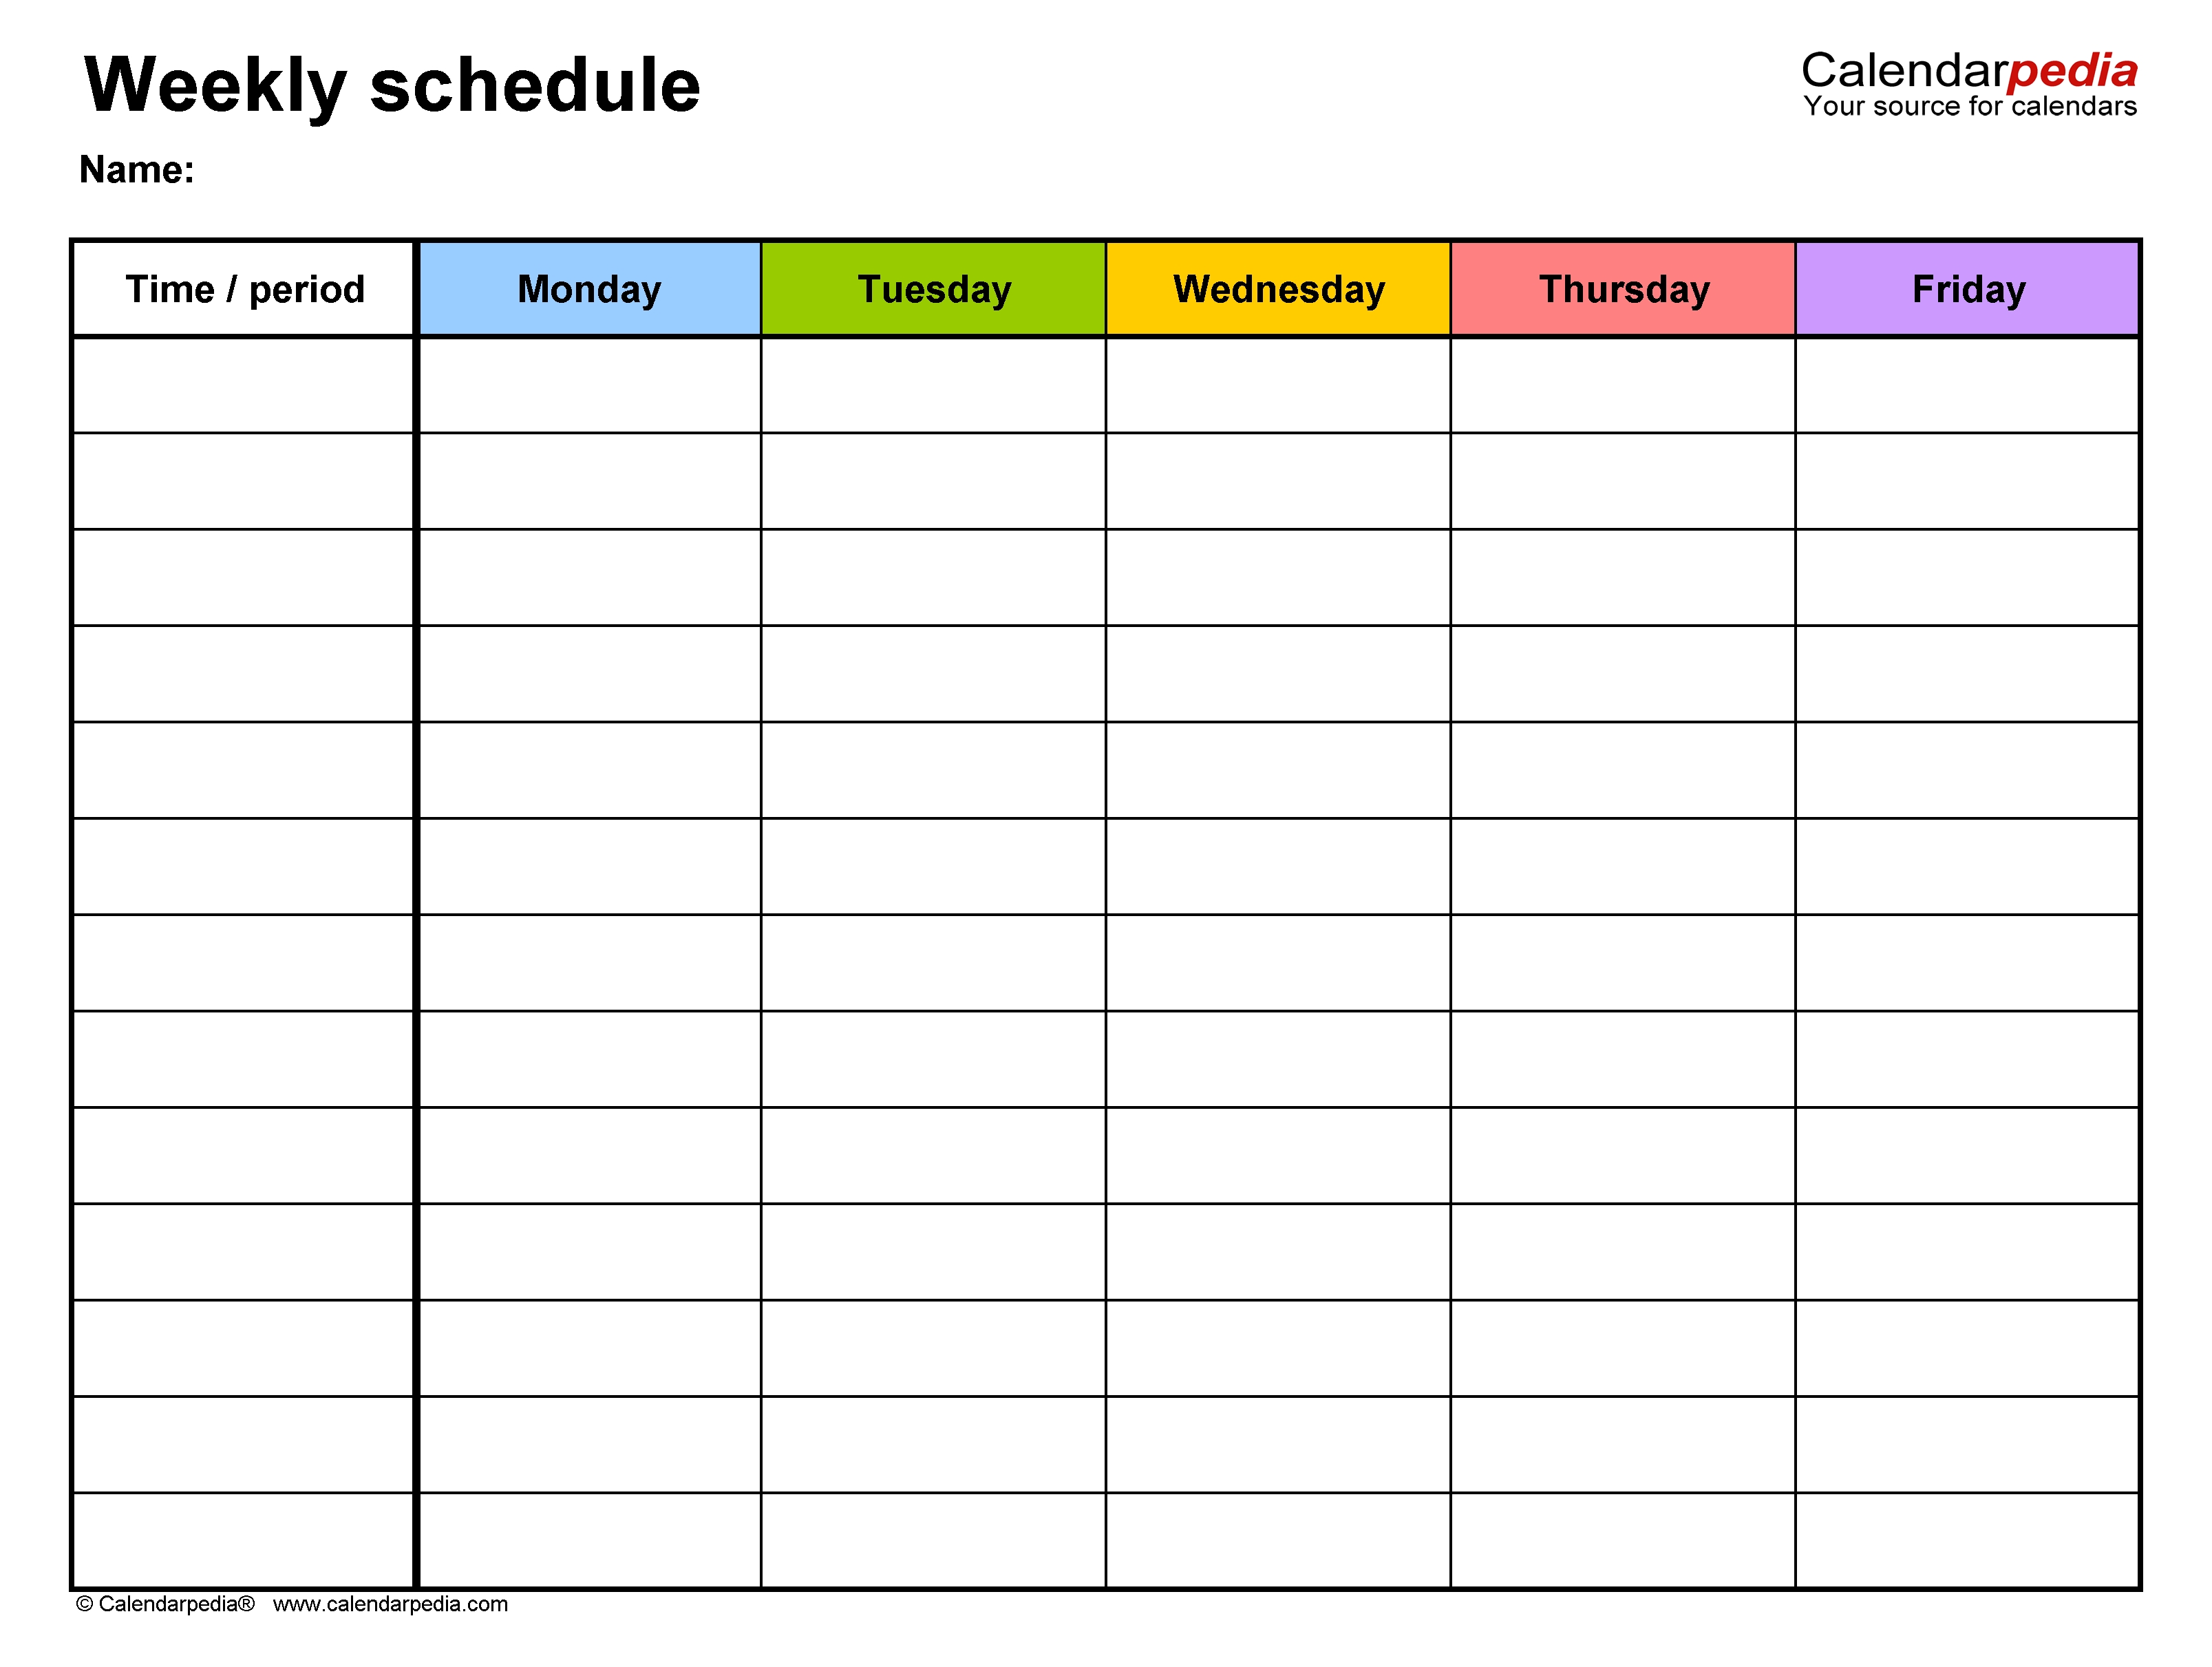 Free Weekly Schedule Templates For Word - 18 Templates Calendar Template In Word For Mac